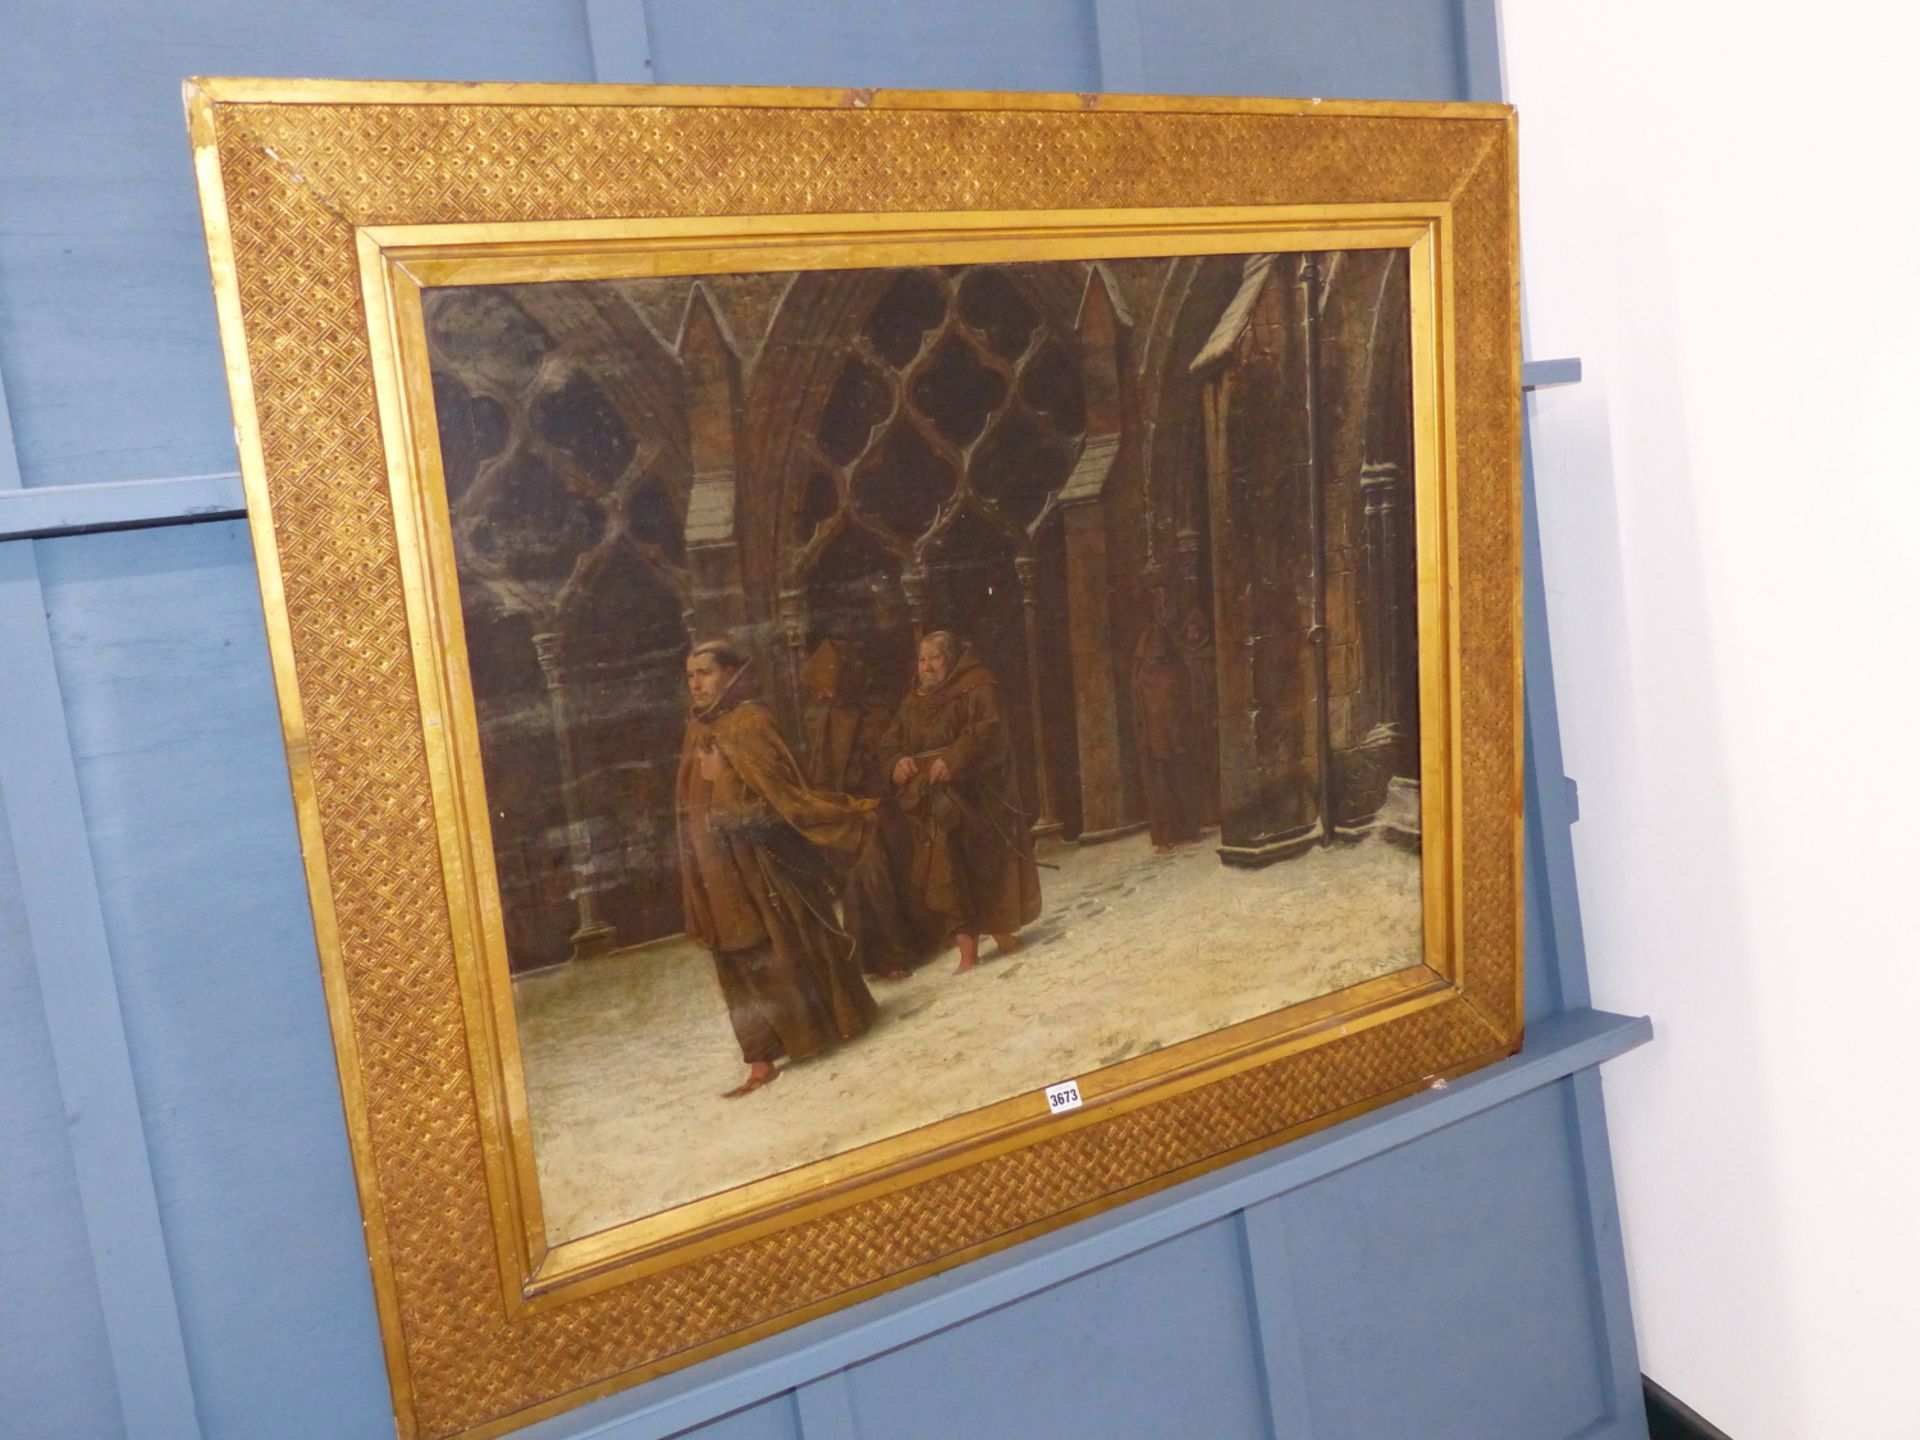 ALFRED TOURRIER (1836-1892) "MATINS" -MONKS ATTENDING MORNING PRAYER, OIL ON CANVAS. INITIALLED - Image 6 of 8